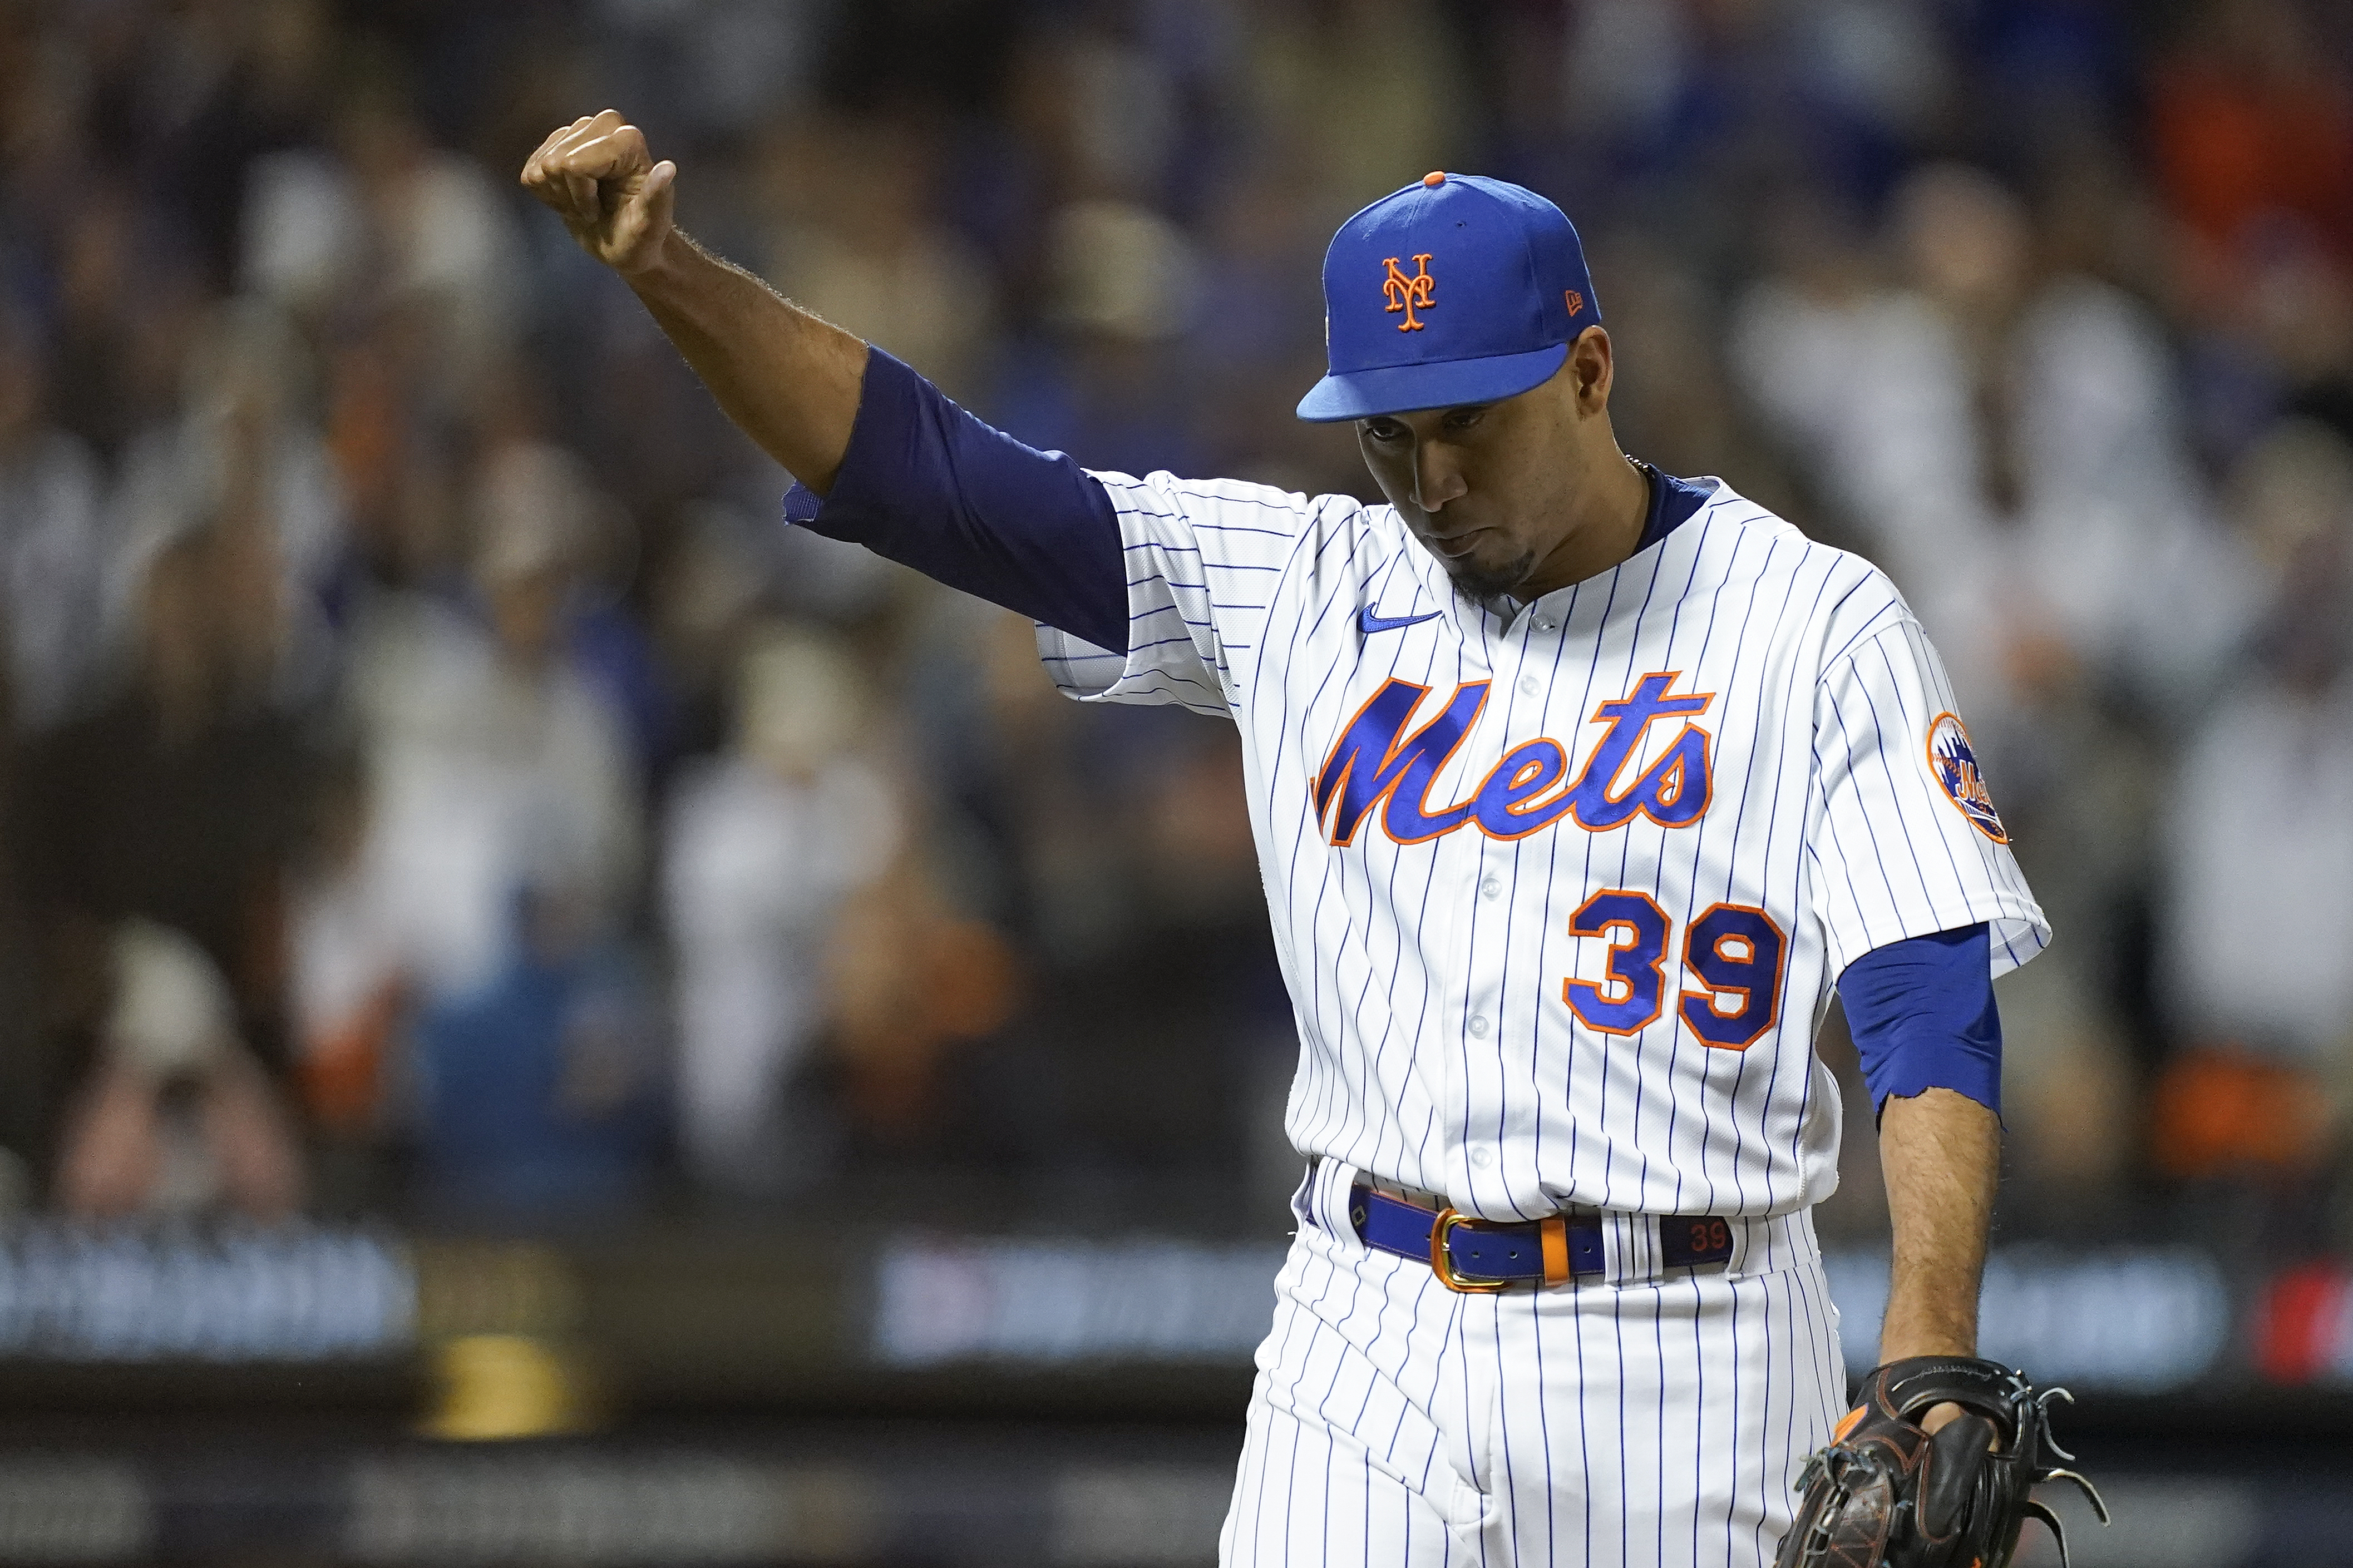 Can NY Mets closer Edwin Diaz make it back this year?